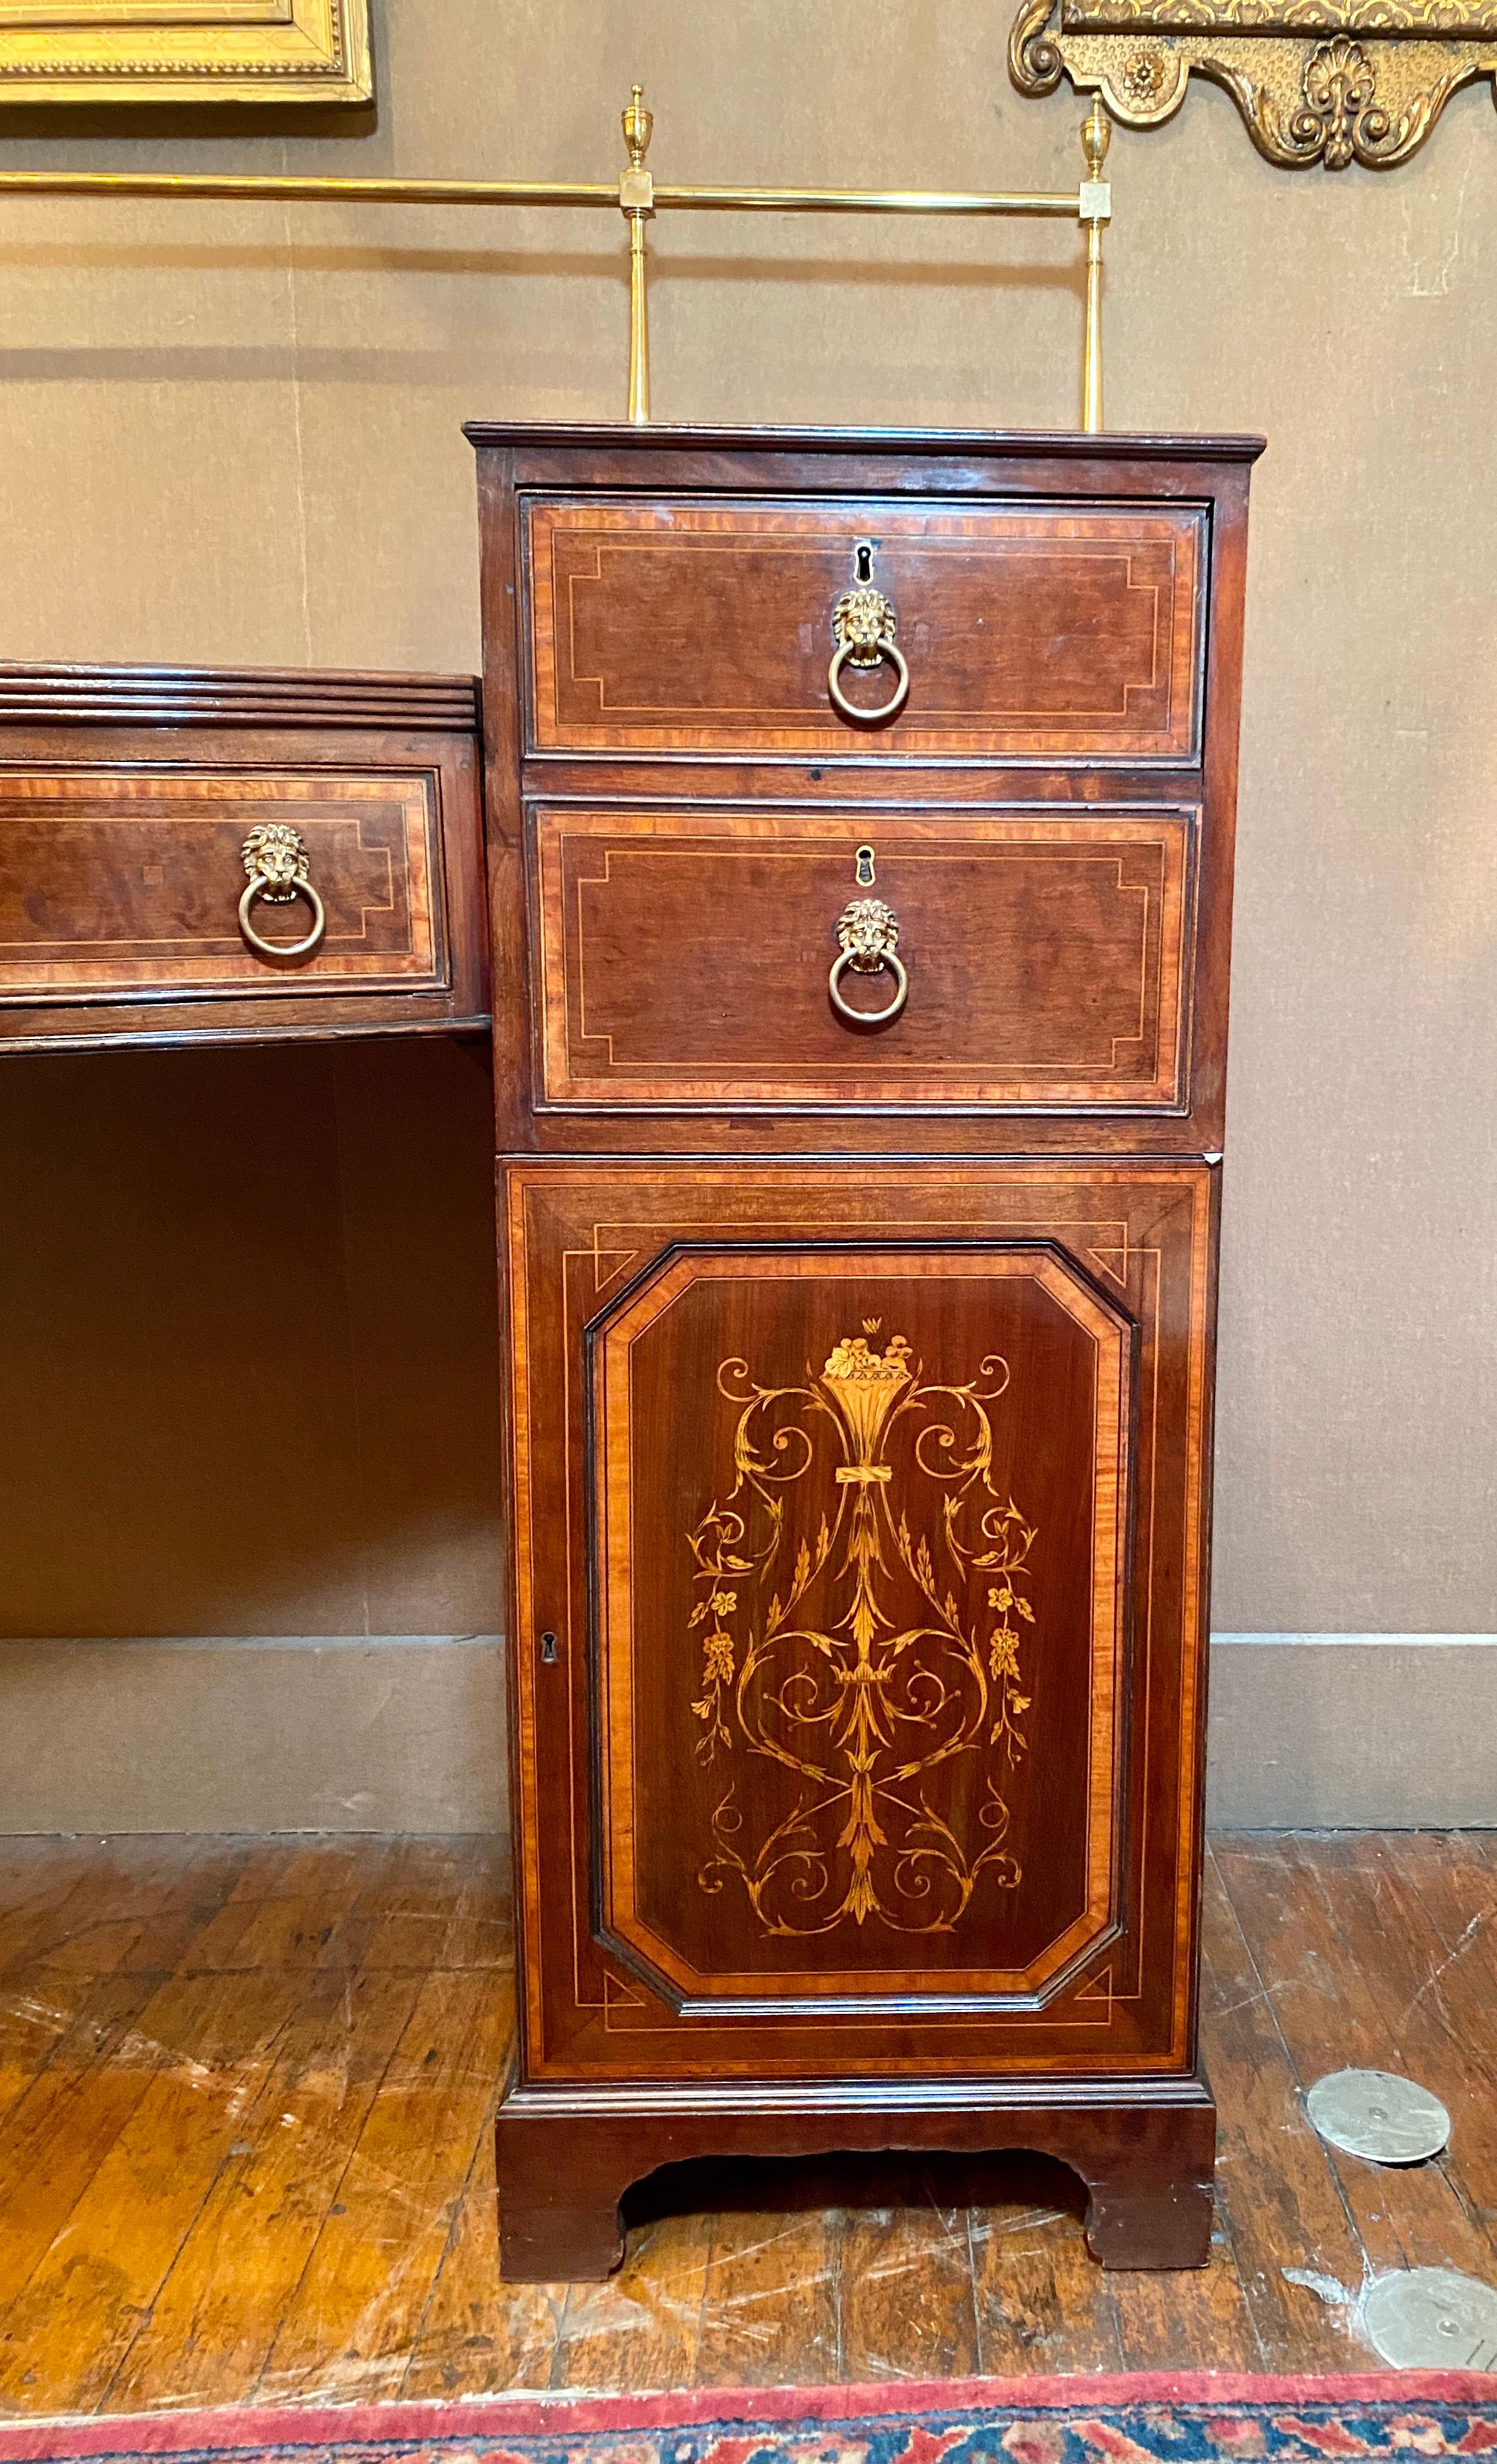 19th Century Antique English Sheraton Inlaid Mahogany Sideboard With Brass Rail, Circa 1870's For Sale